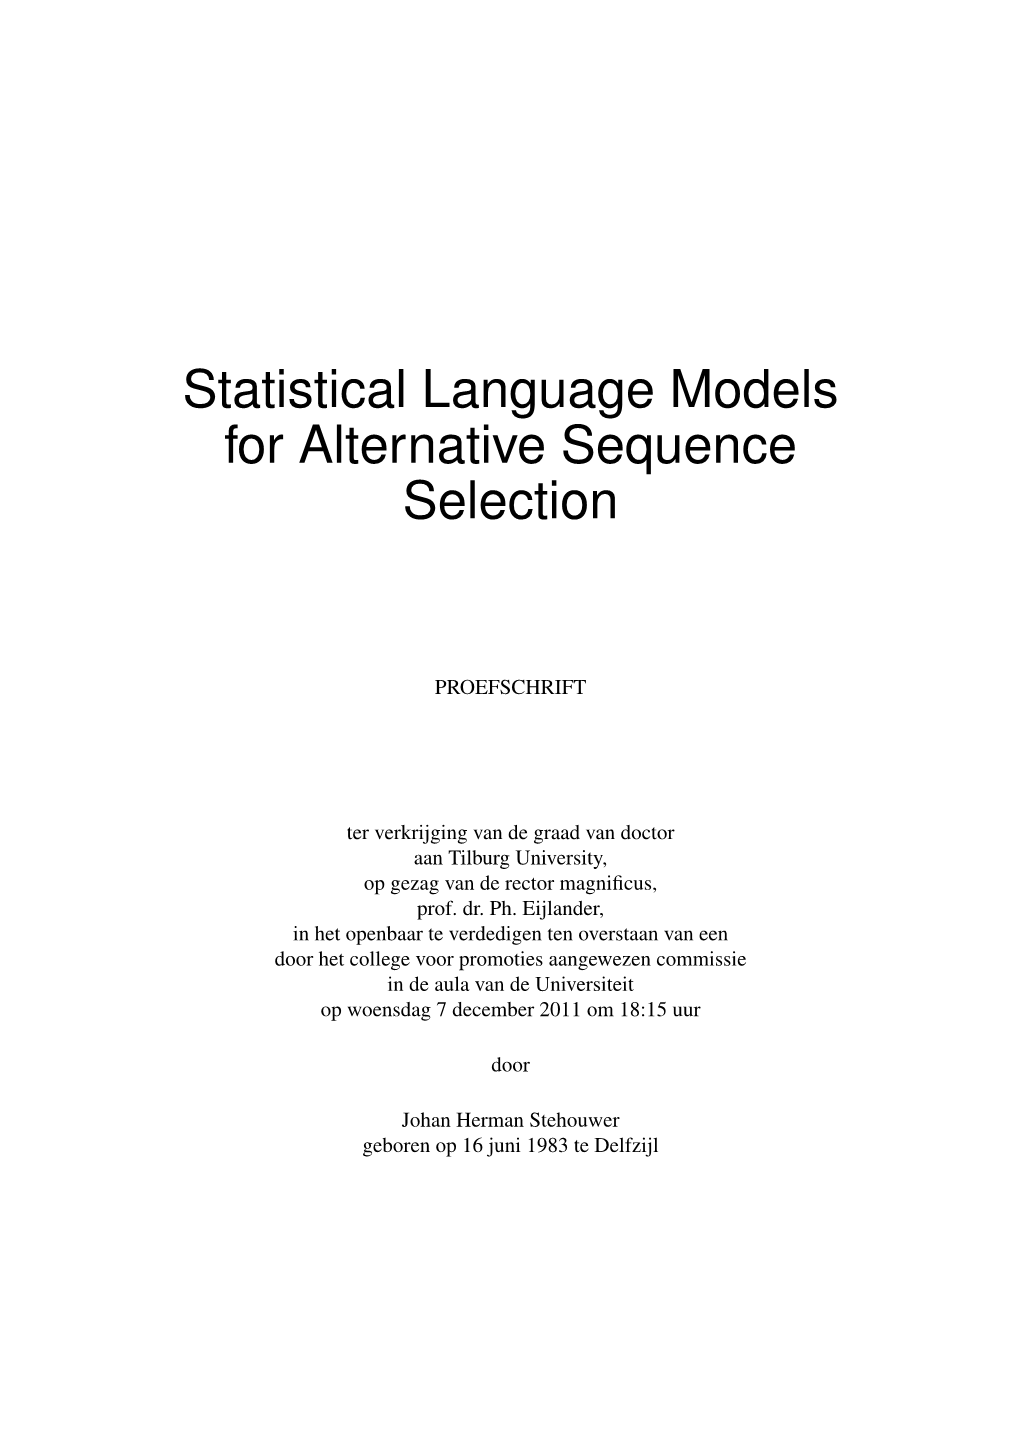 Statistical Language Models for Alternative Sequence Selection